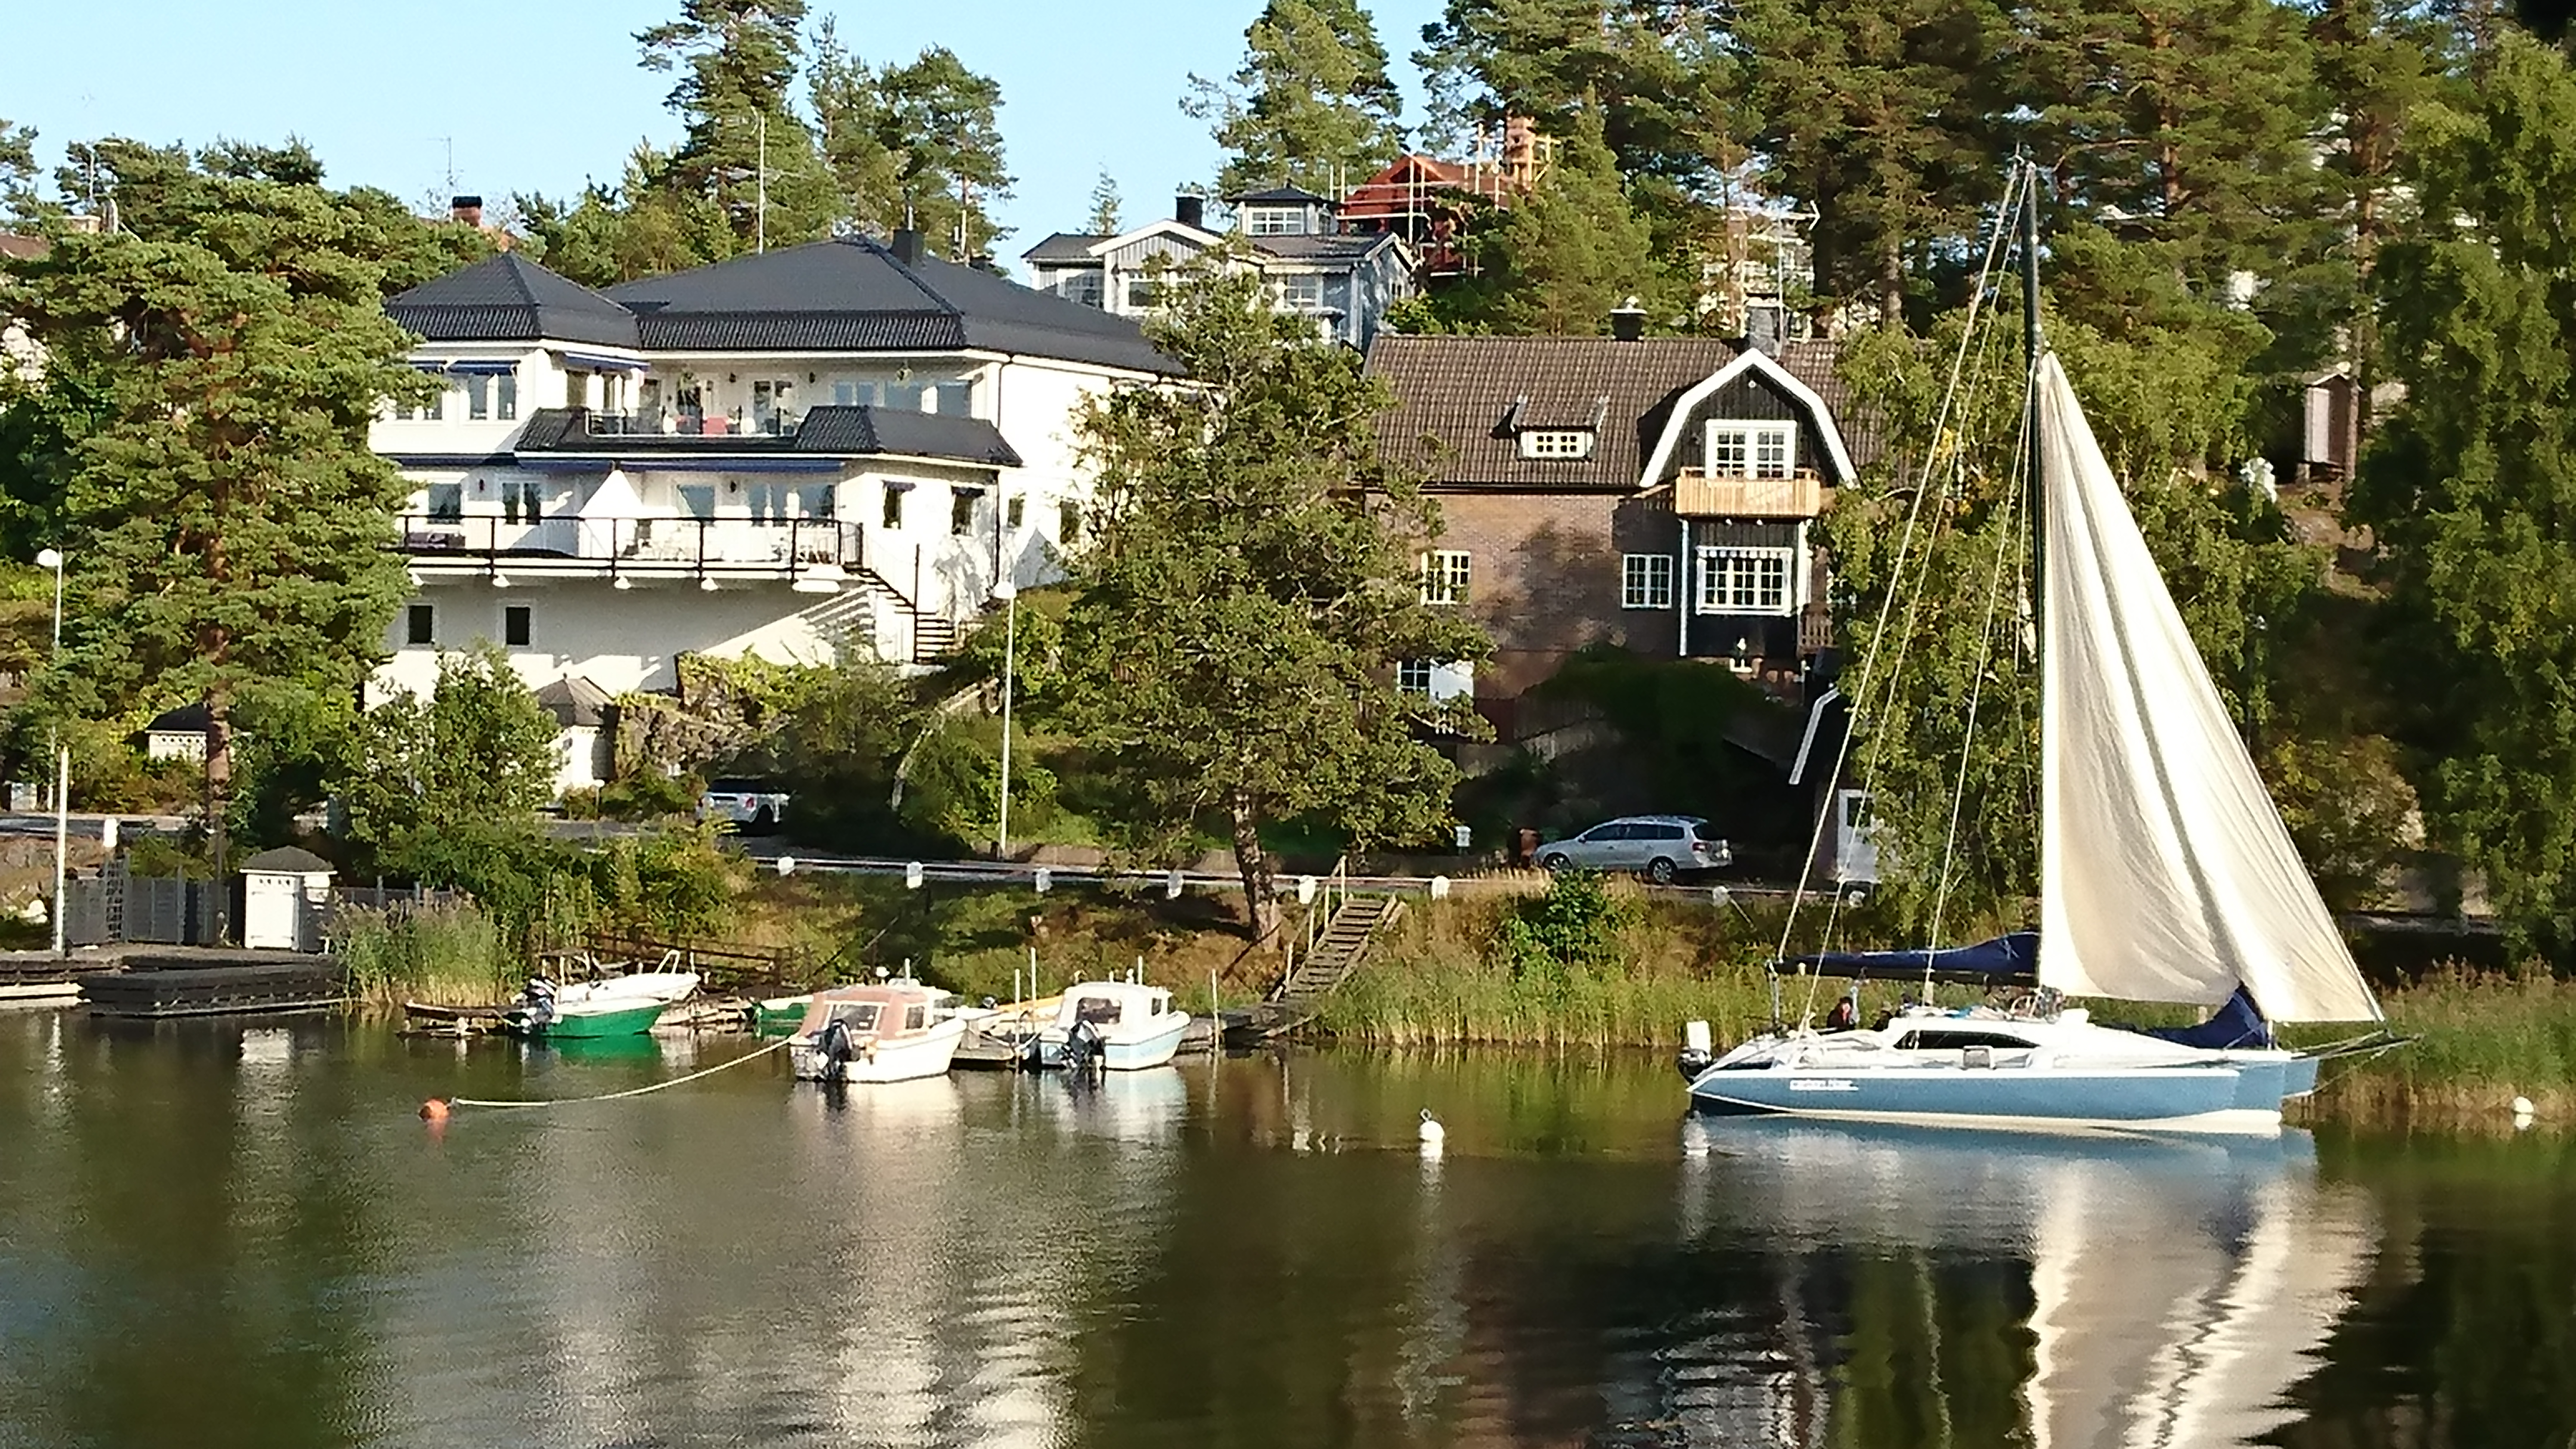 Picture from the habour of Nynäshamn